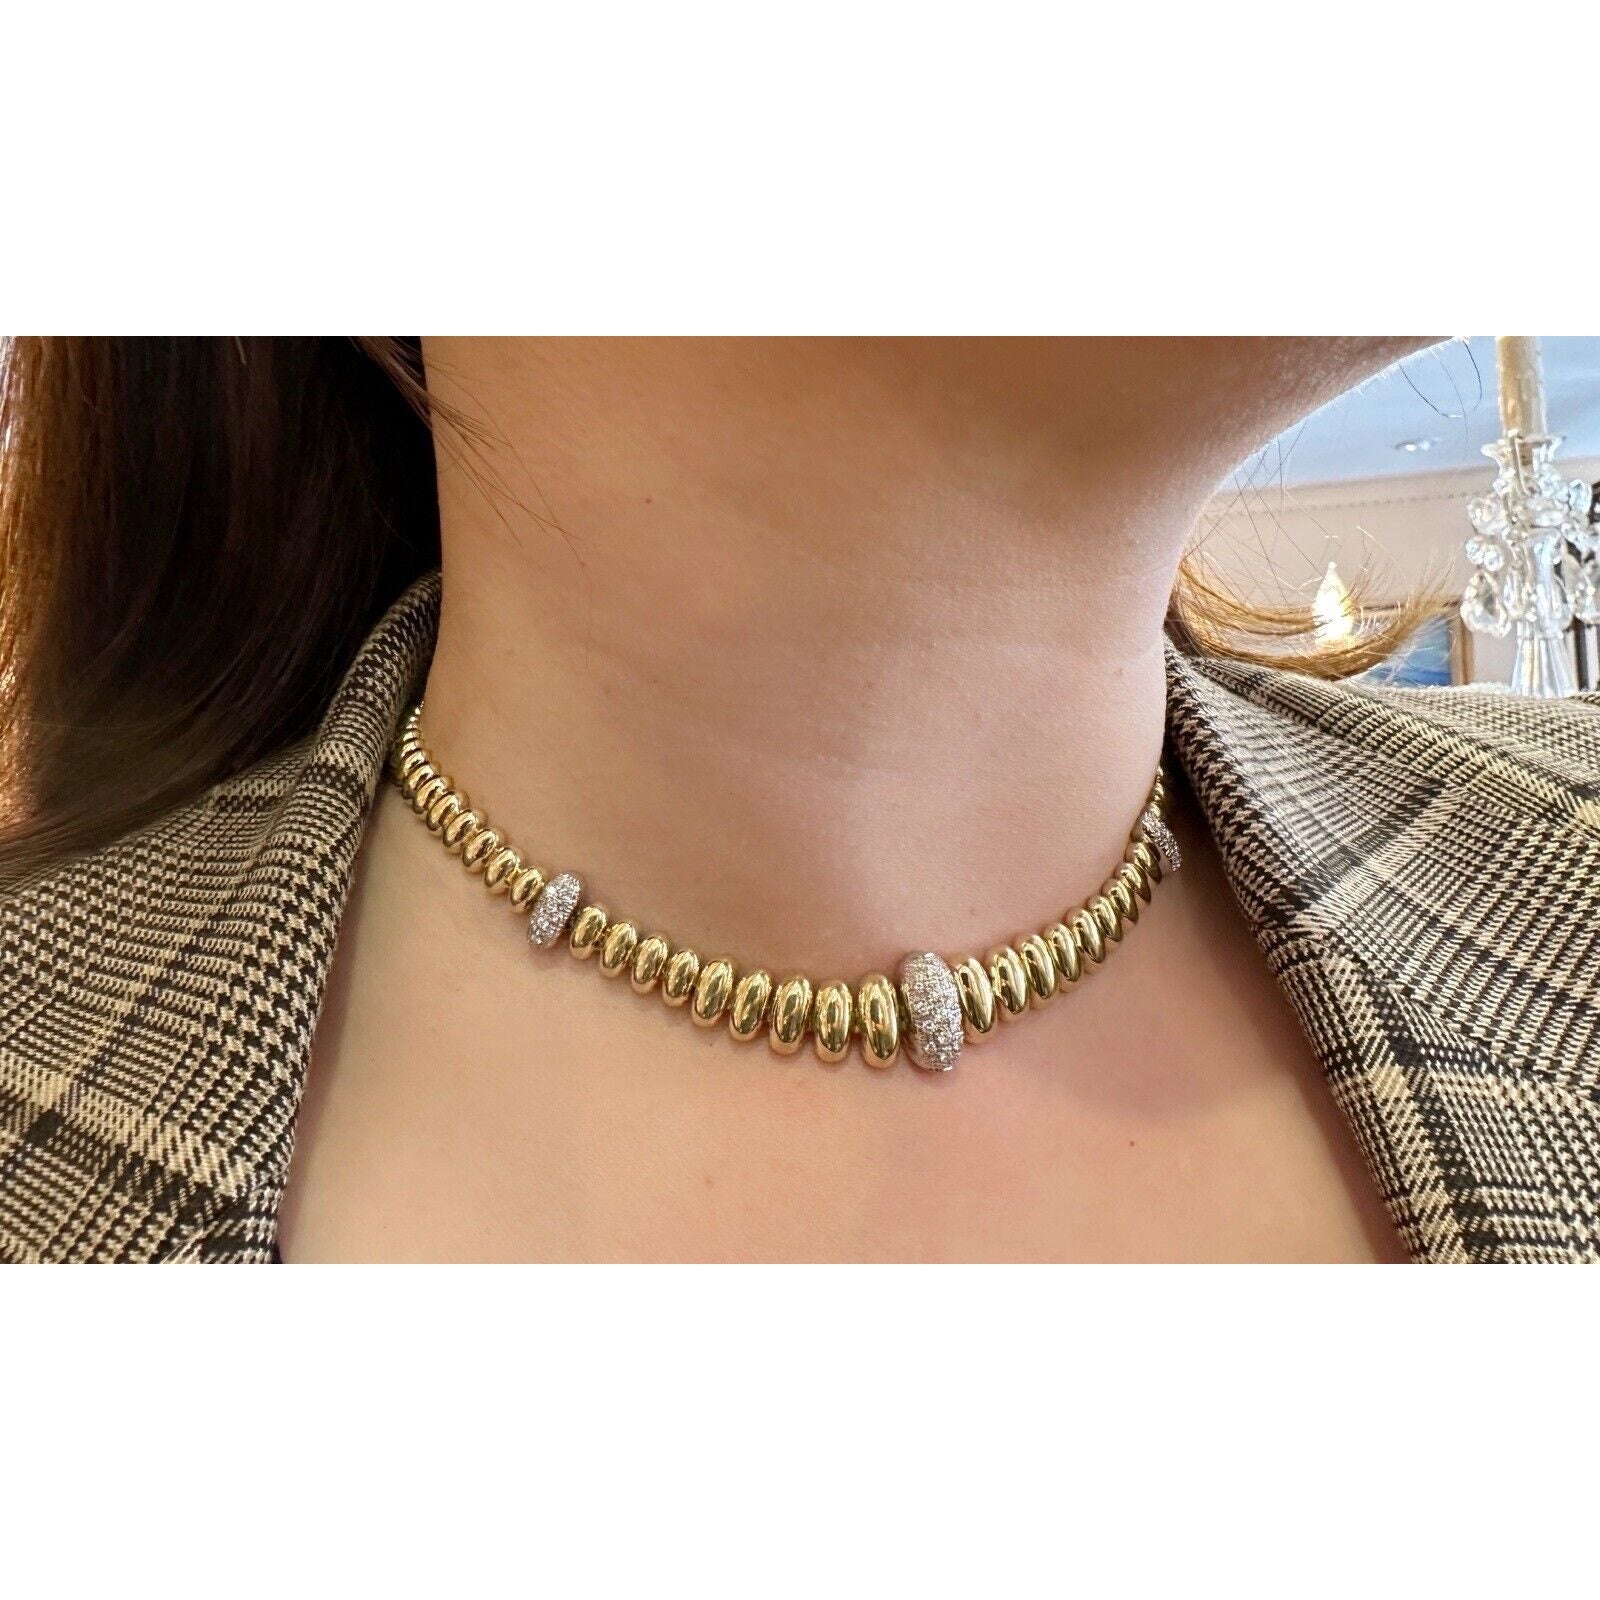 Oval Bead Link Choker Necklace with Diamond Links in 18k Yellow Gold-HM2557BV